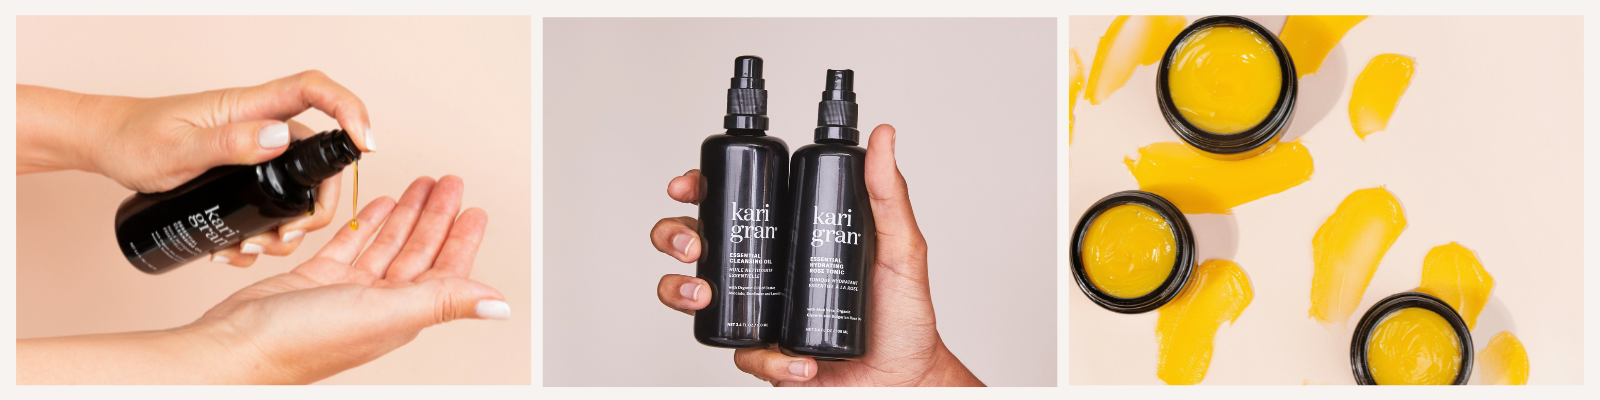 three images, one with product being pumped into hand, hand holding KG bottles and third of the essential serum balm